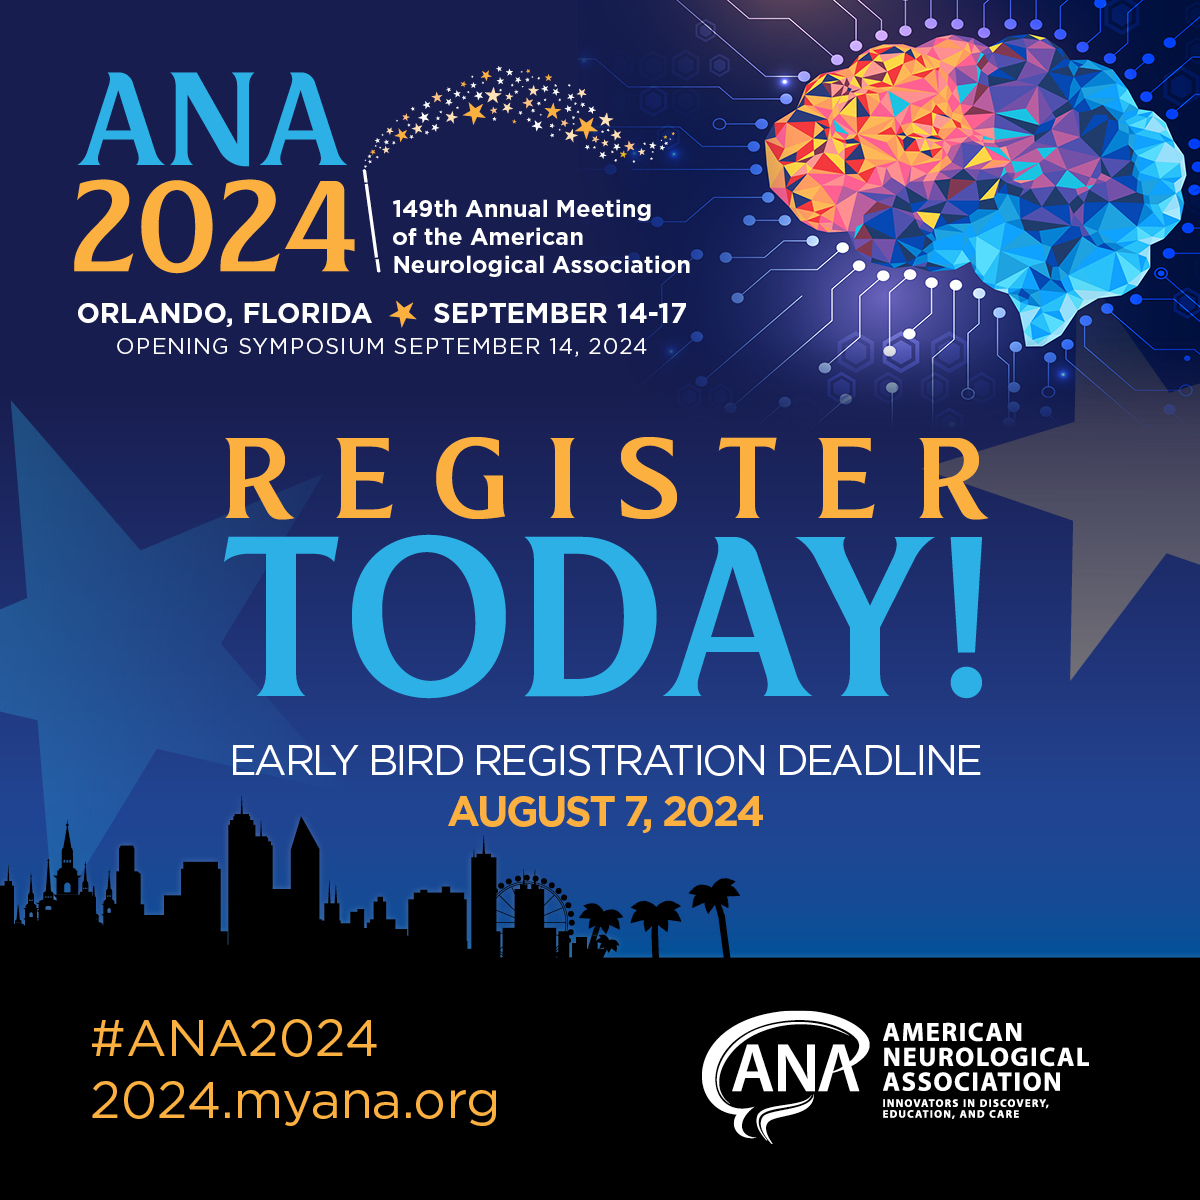 #ANA2024 registration is open! We invite you to join us at ANA2024 this September 14 - 17, 2024, in #Orlando. ANA2024 will offer cutting edge research and the latest discovery in neurology and neuroscience. members.myana.org/site_event_det…